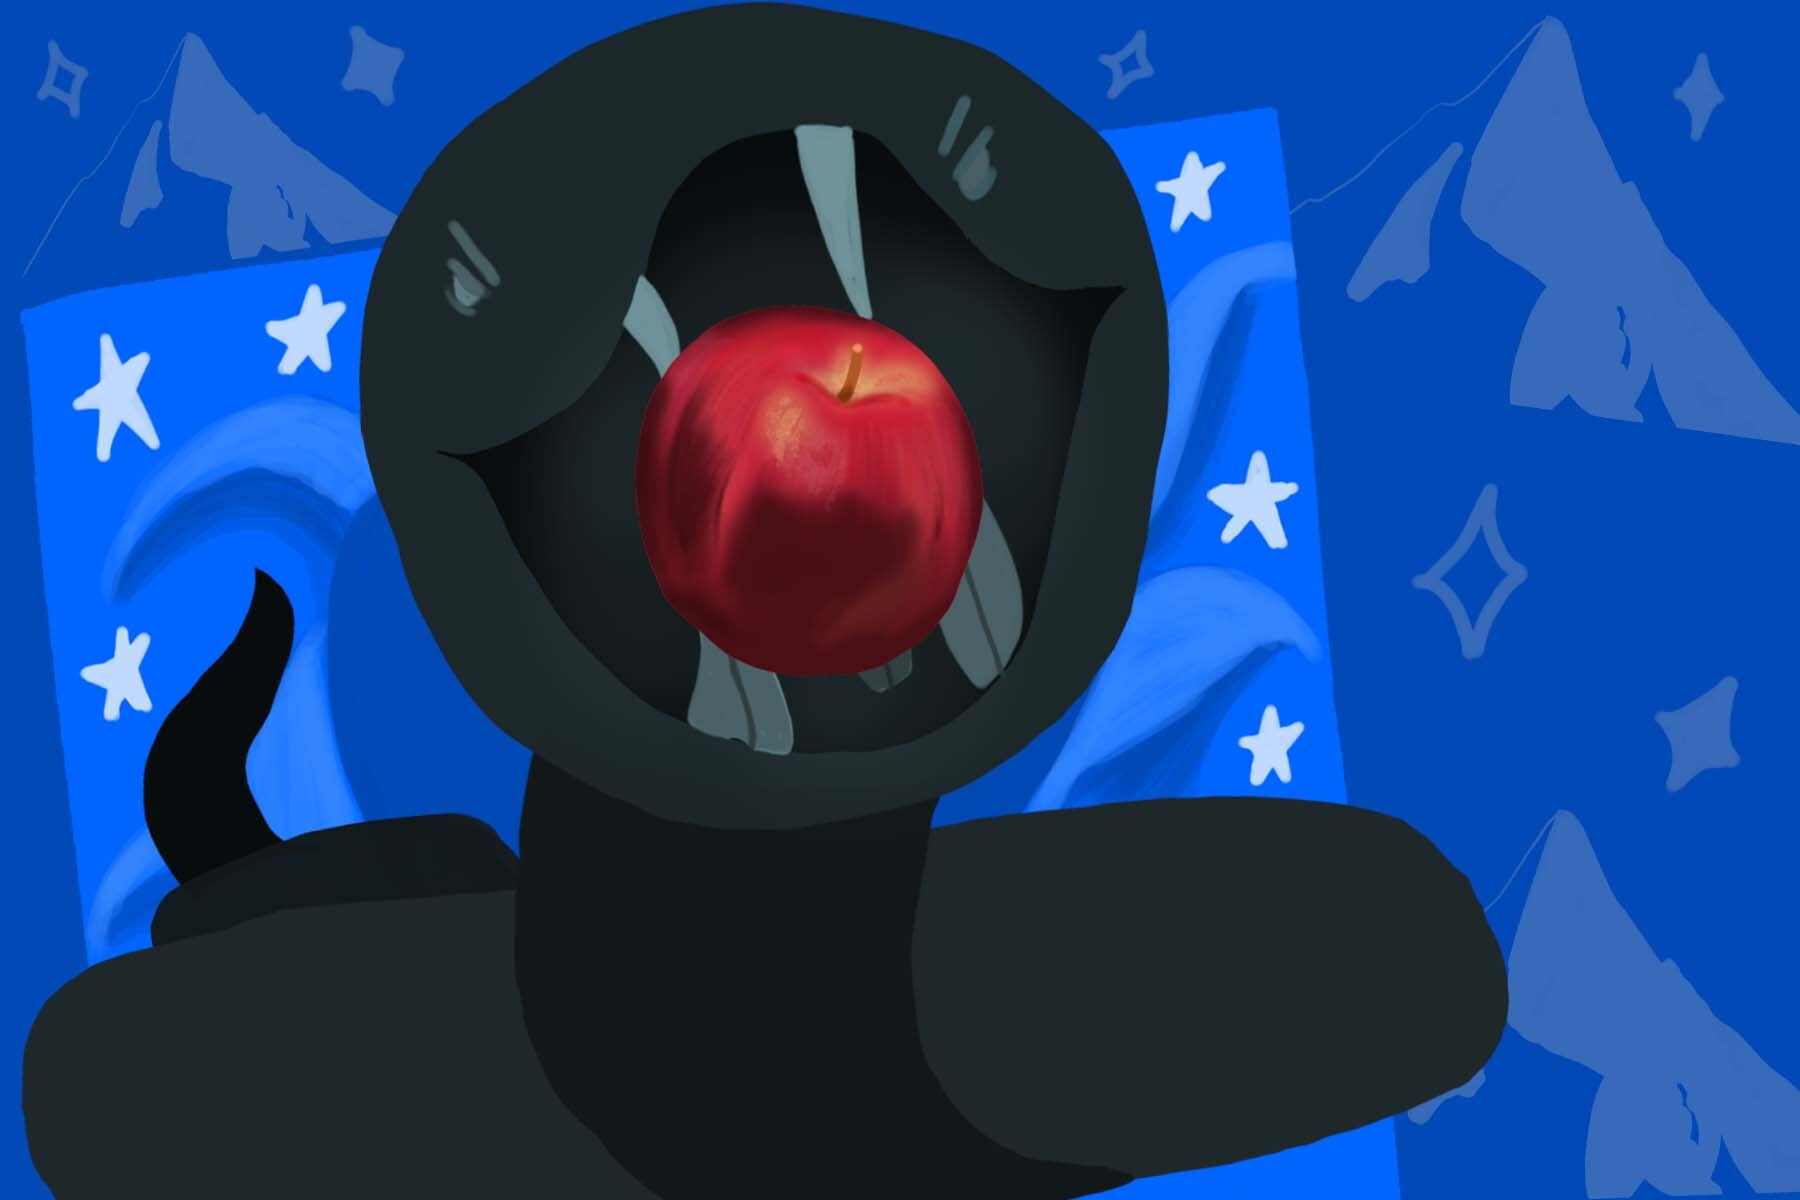 An illustration depicting a snake biting into an apple represents Evil, a show about the battle between science and religion. The snake imagery evokes the Garden of Eden according to Catholic doctrine.